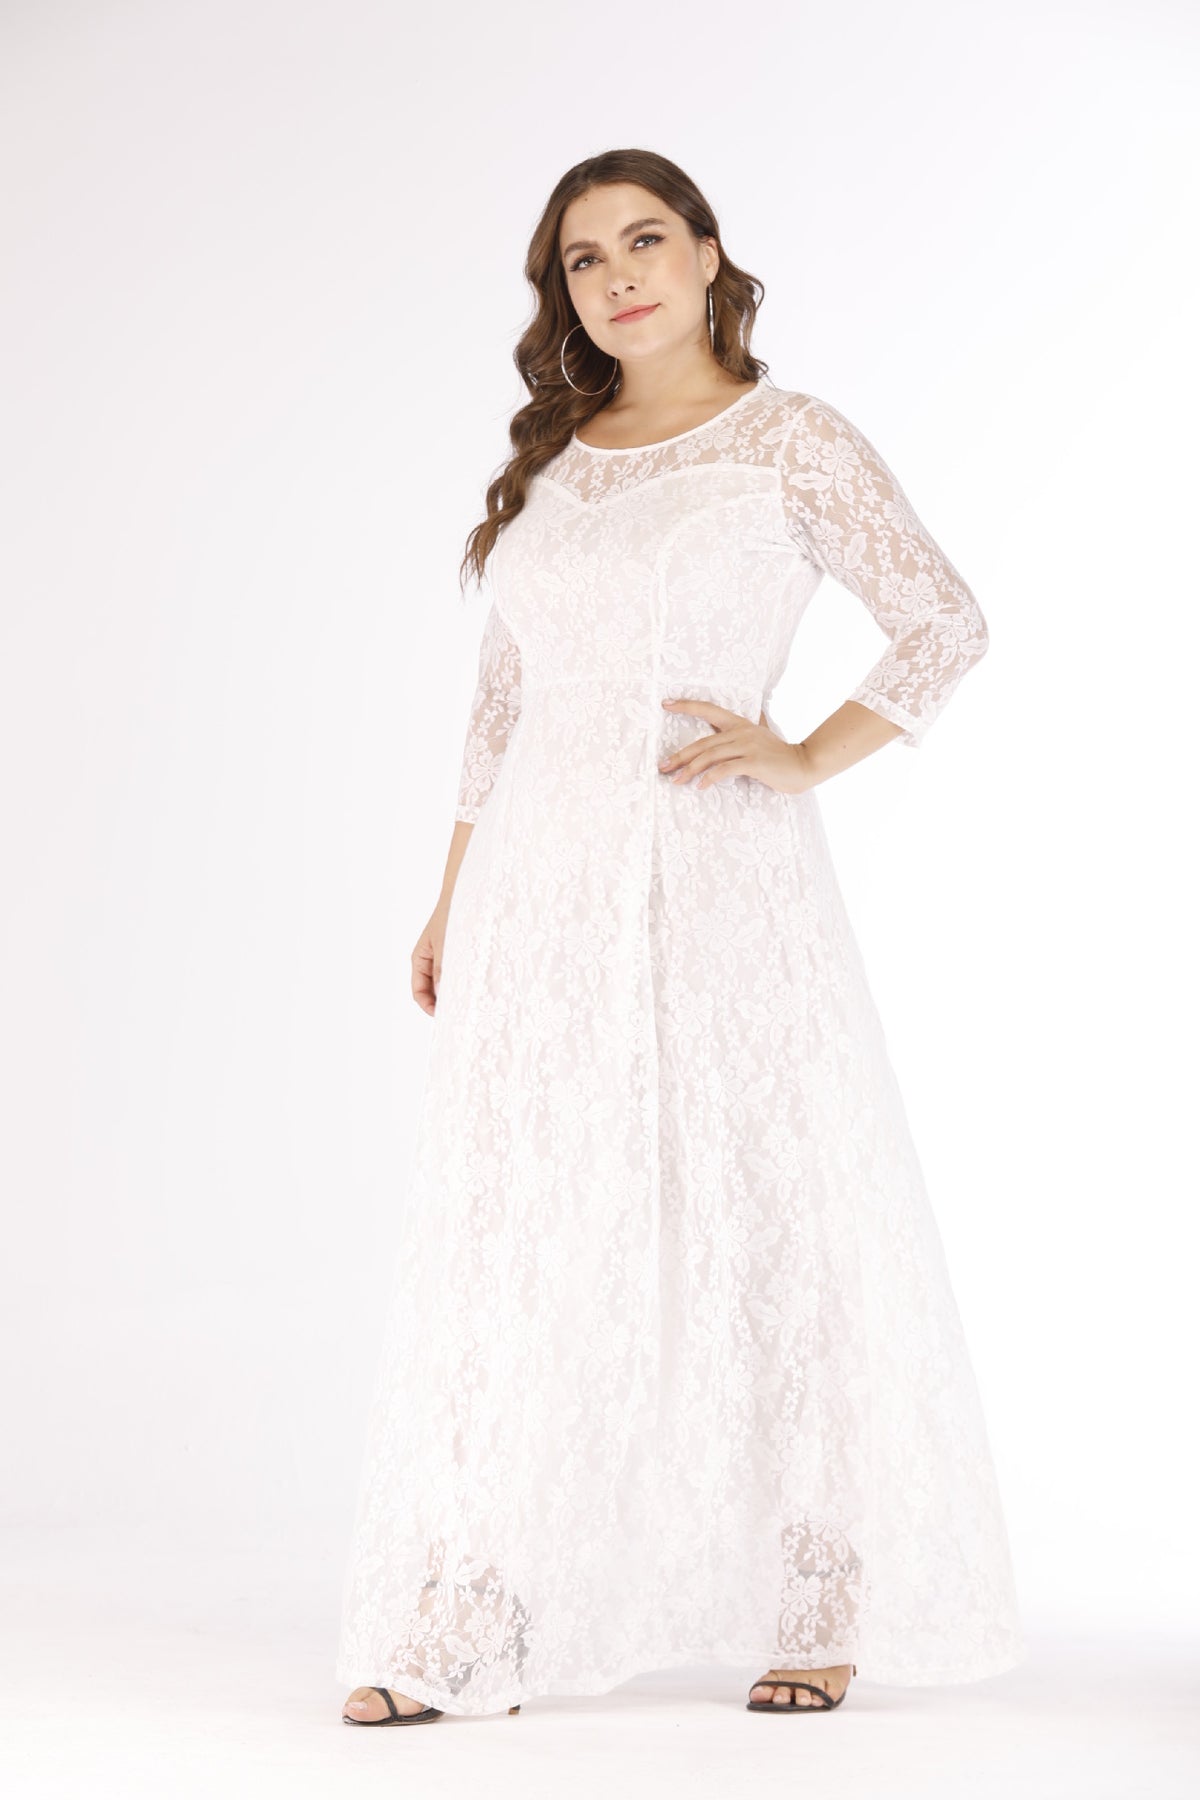 Color: White, Size: 5XL - Sleeve Long Skirt Amazon Middle East Lace Dress